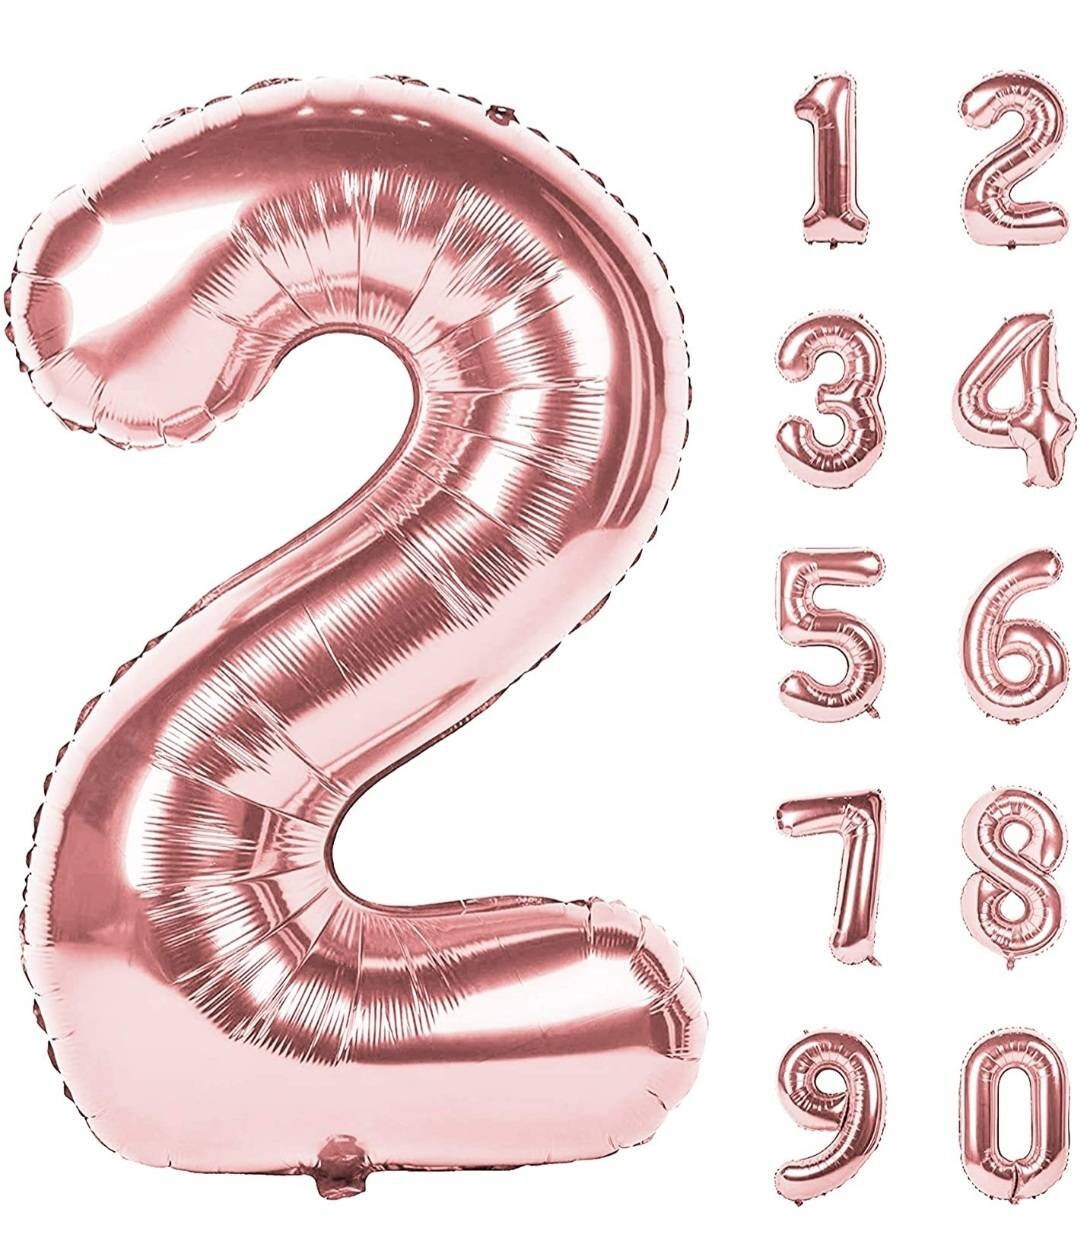 40 Inch ROSE GOLD Giant Number Mylar Foil Balloon for Birthday Anniversary Party Decoration